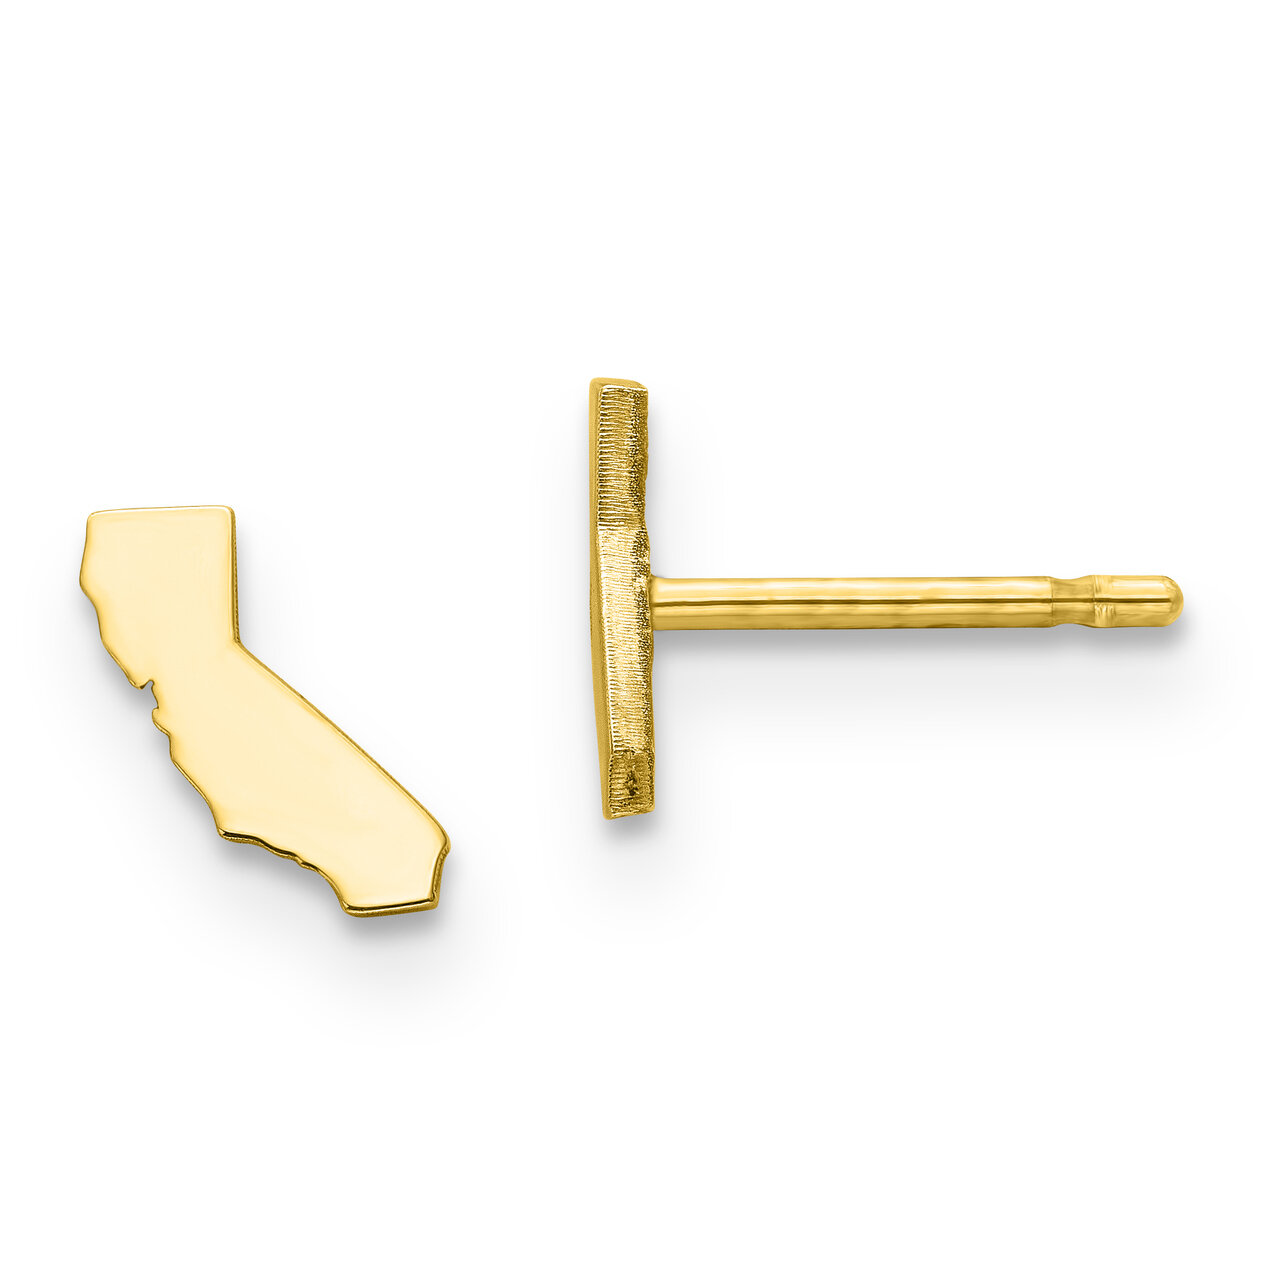 California State Small Earrings 14k Yellow Gold Engravable XNE50Y-CA